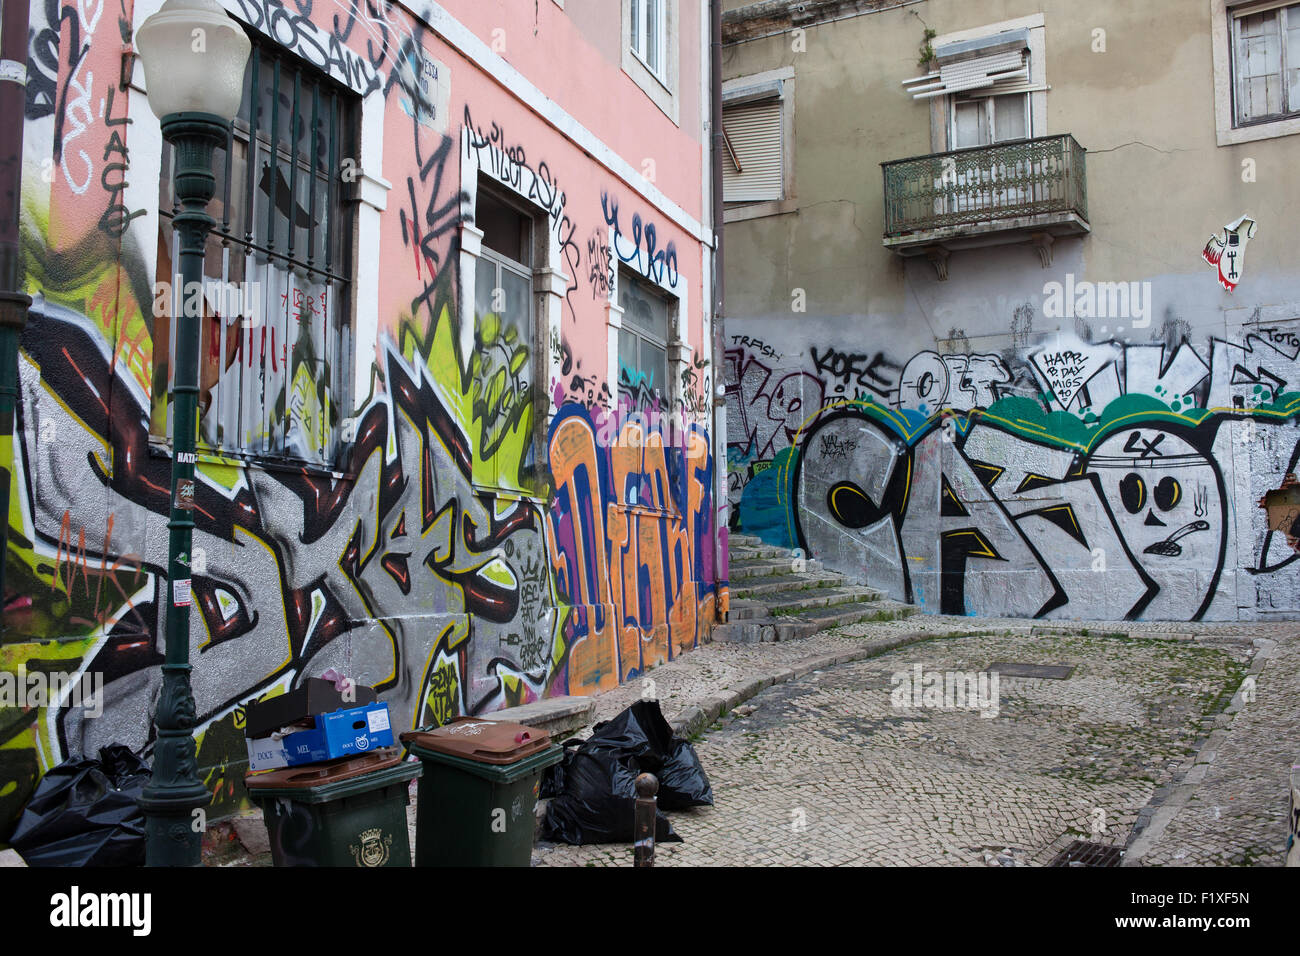 Graffiti on building wall and garbage on backyard in Lisbon, Portugal Stock Photo